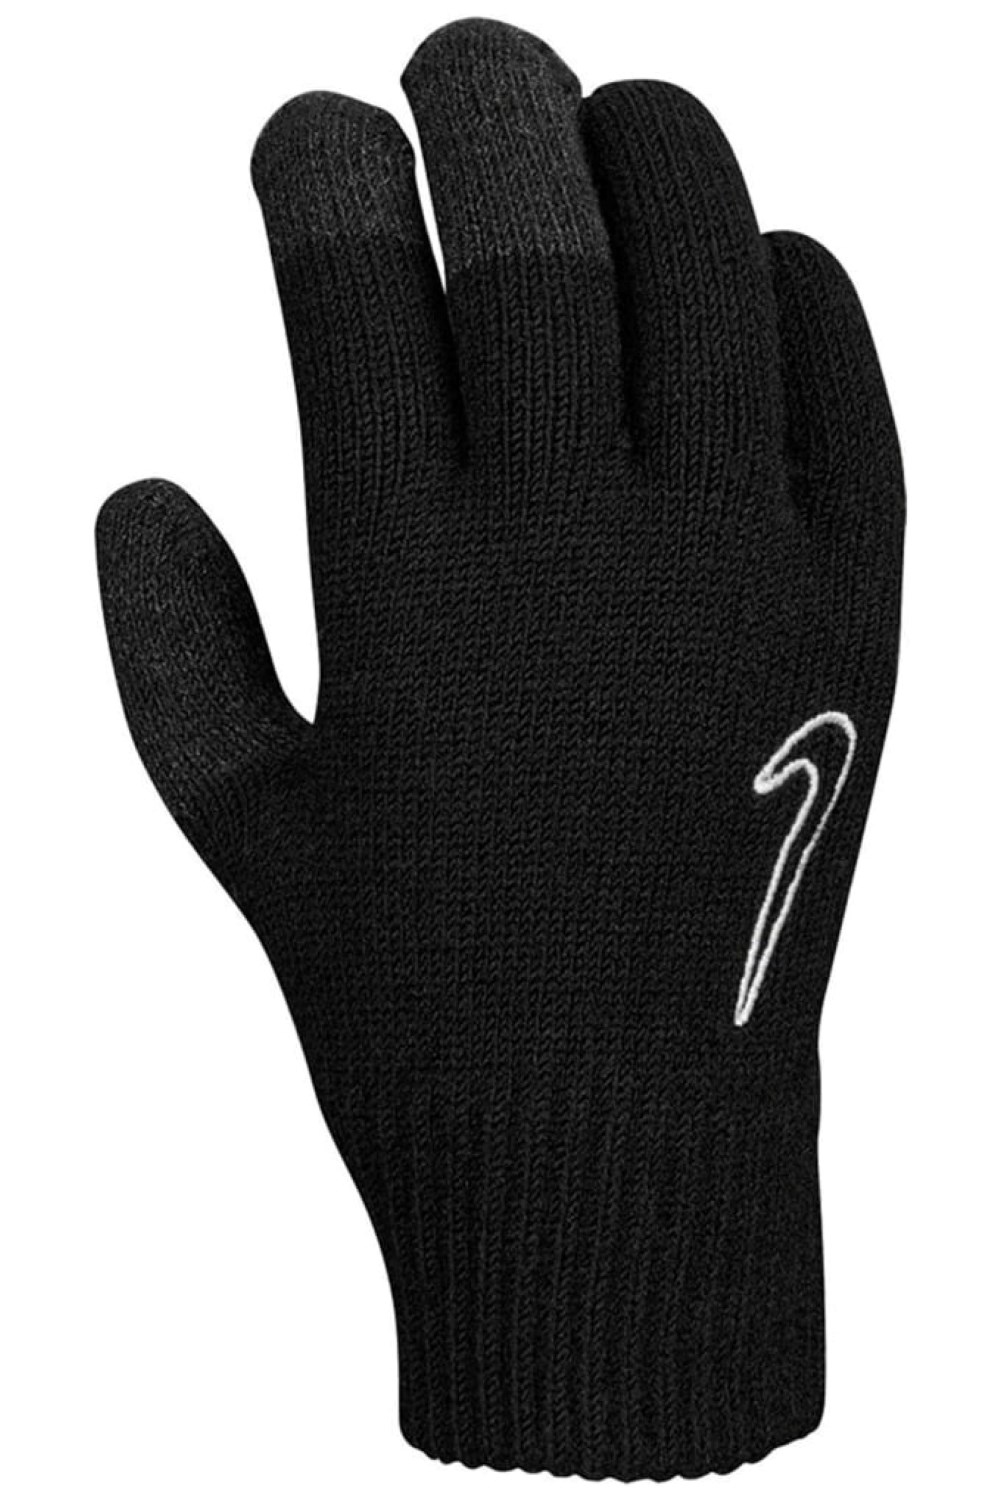 Mens Knitted Twisted Grip Gloves -